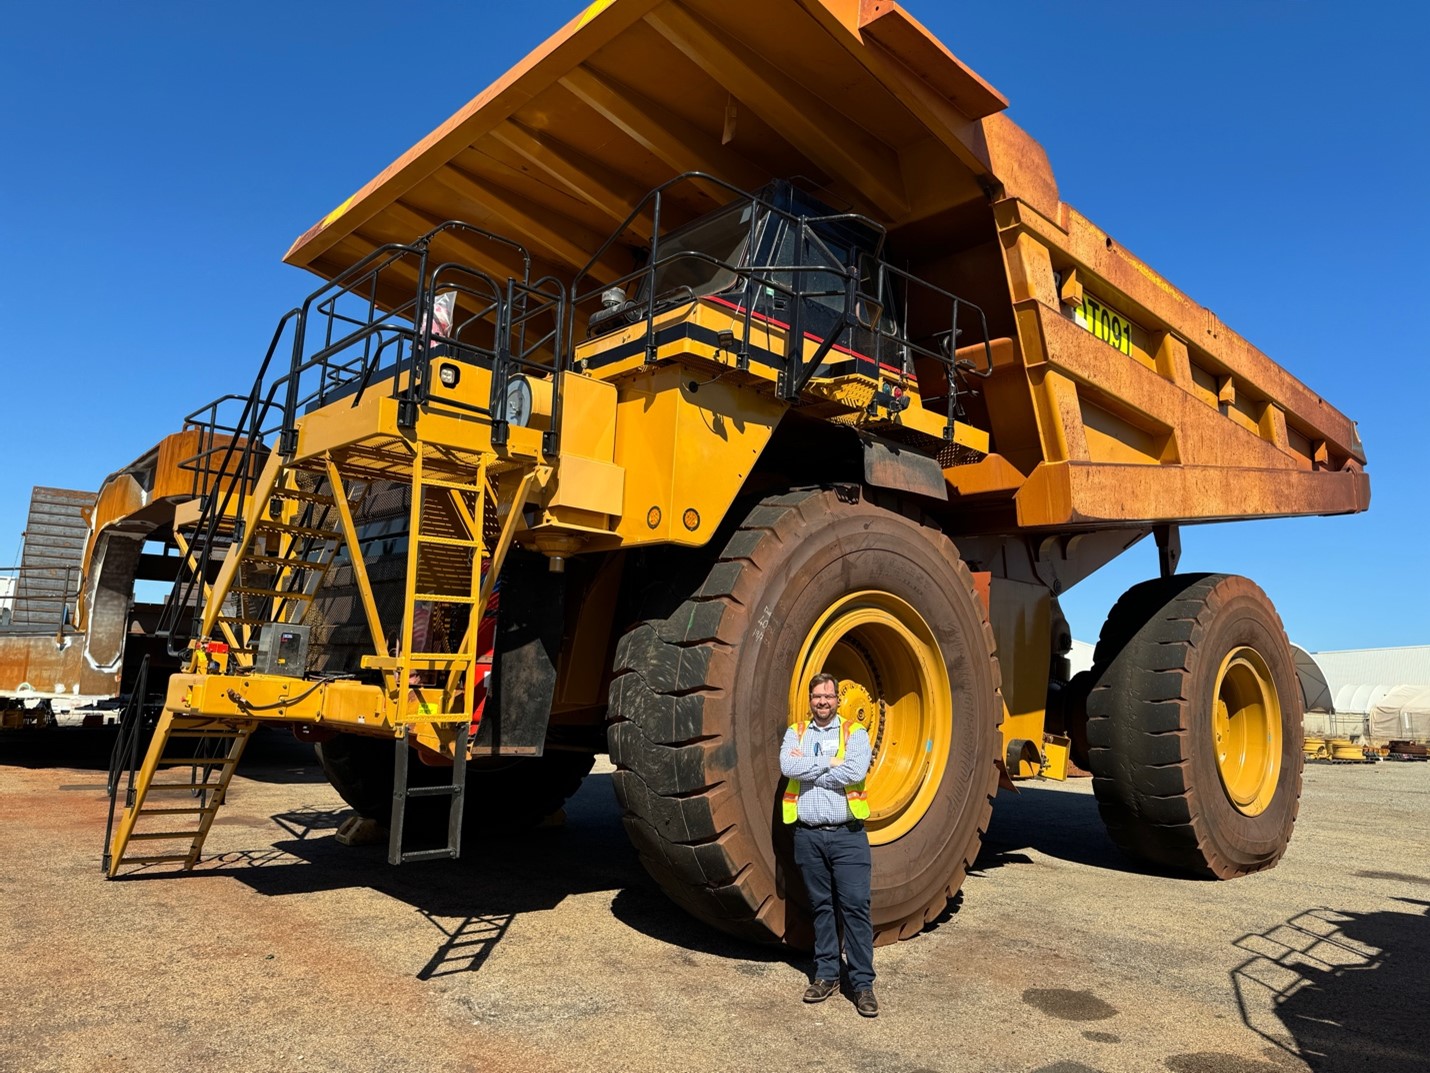 Geoforce CEO, James Maclean III, visits one of our mining customers